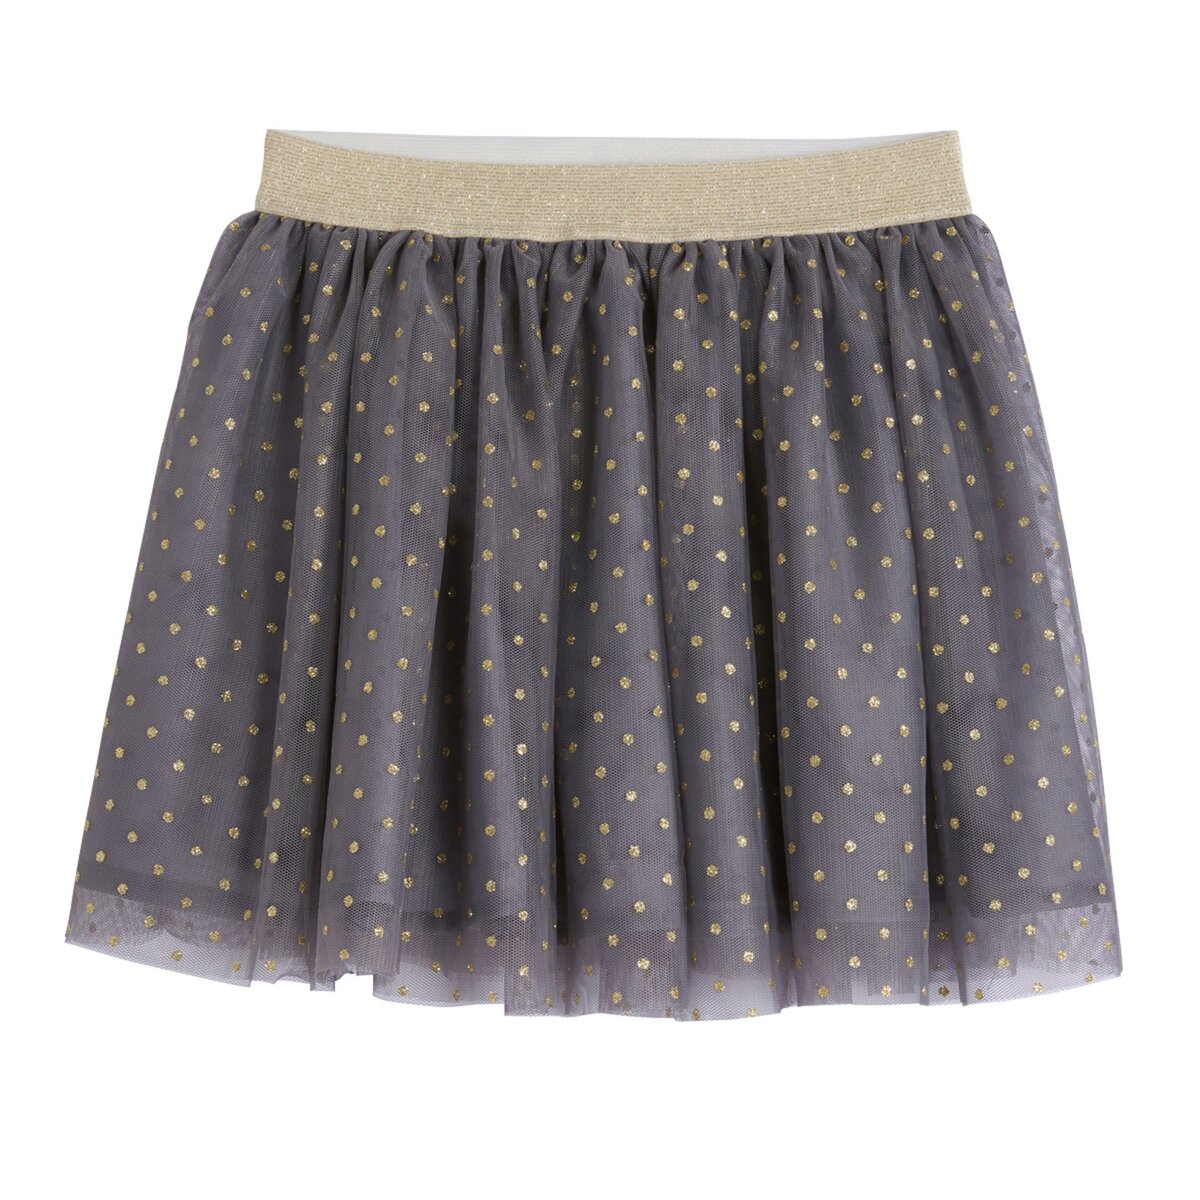 IN EXTENSO Jupe tulle à pois taille pailletée fille 